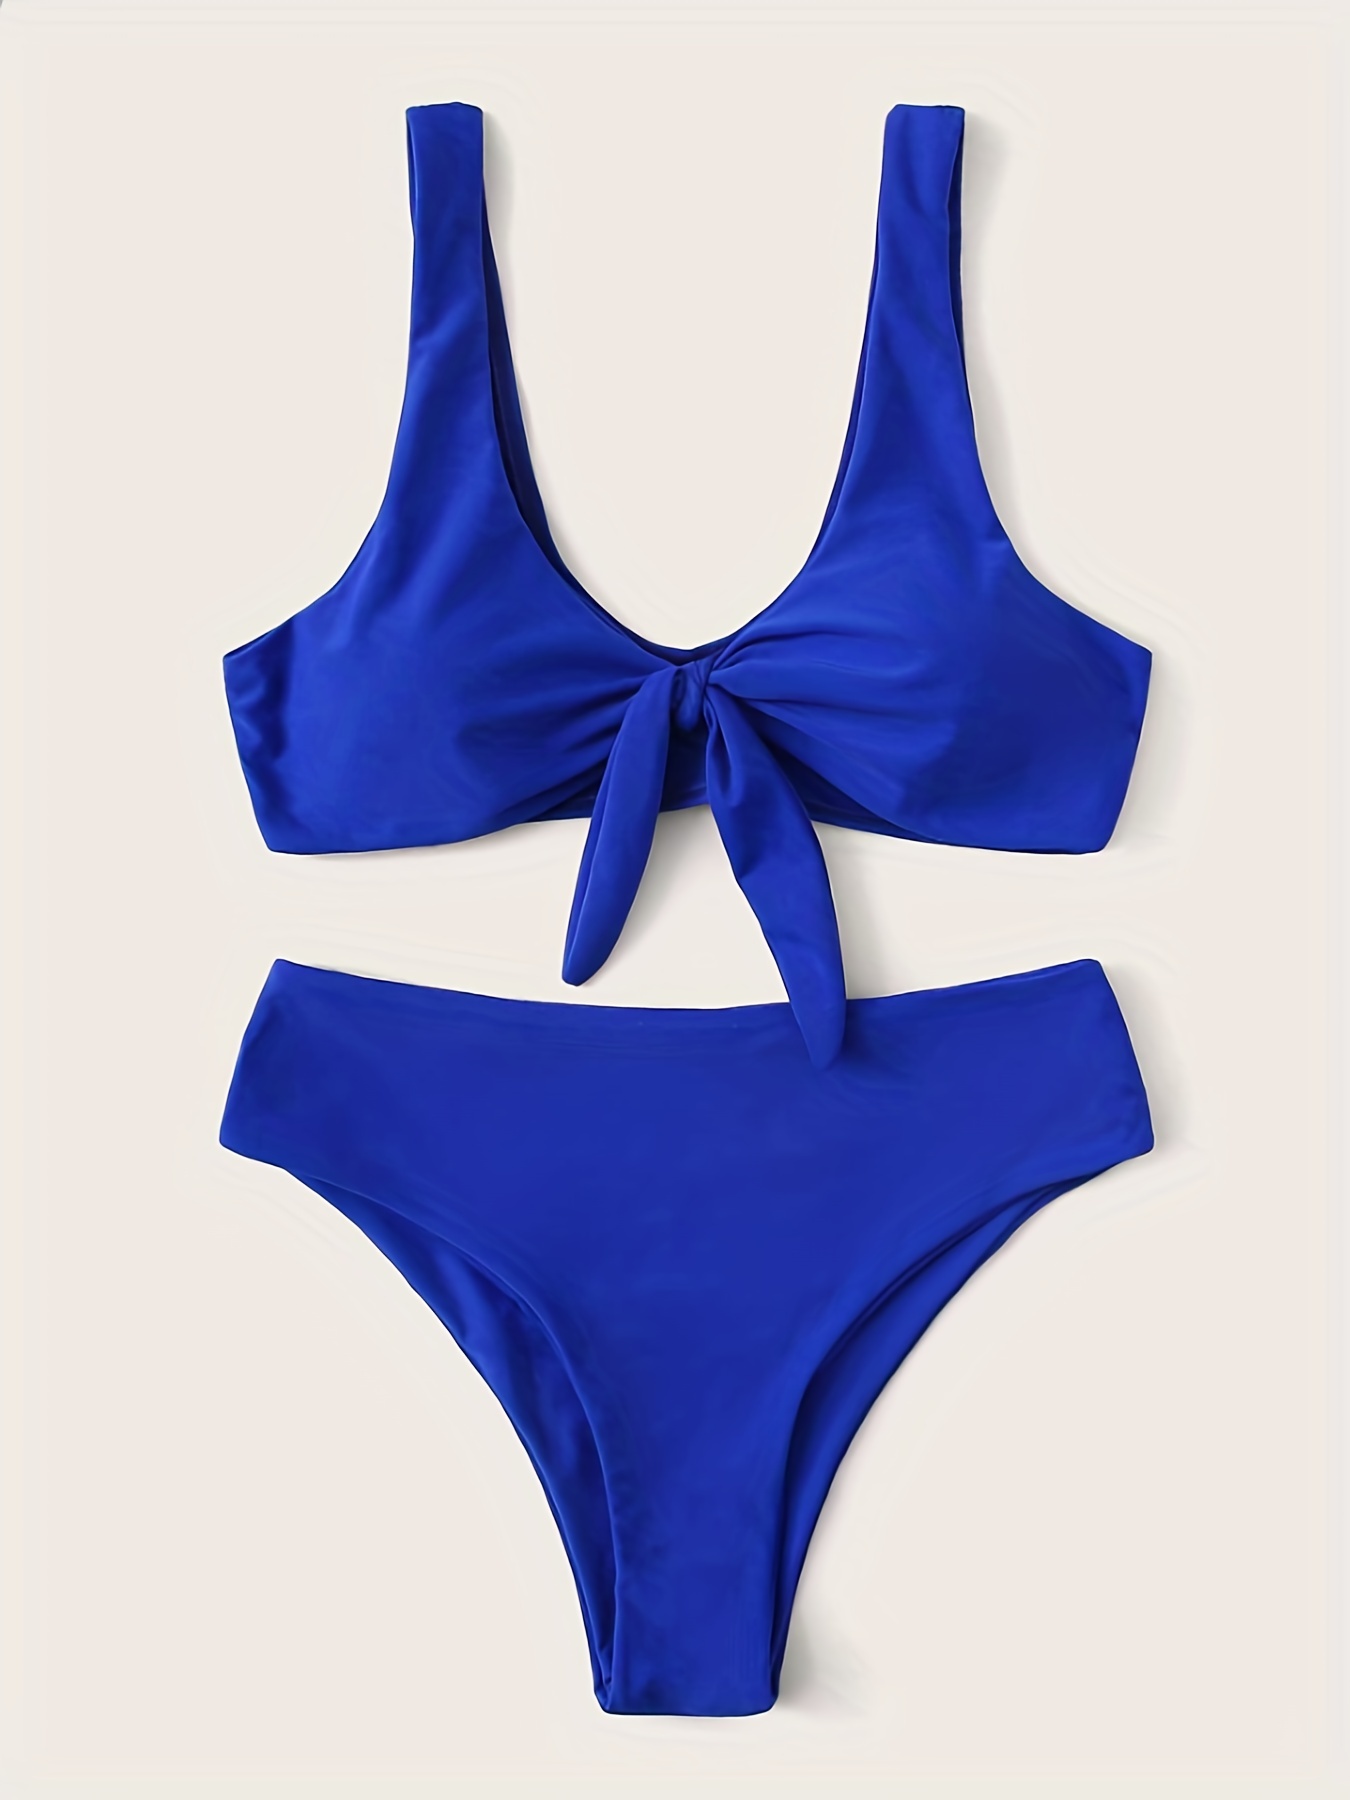 ZAFUL Women's Bikini Set Two Piece Swimsuits Bathing Suits Solid Tie Front  High Waist Swimming Suit